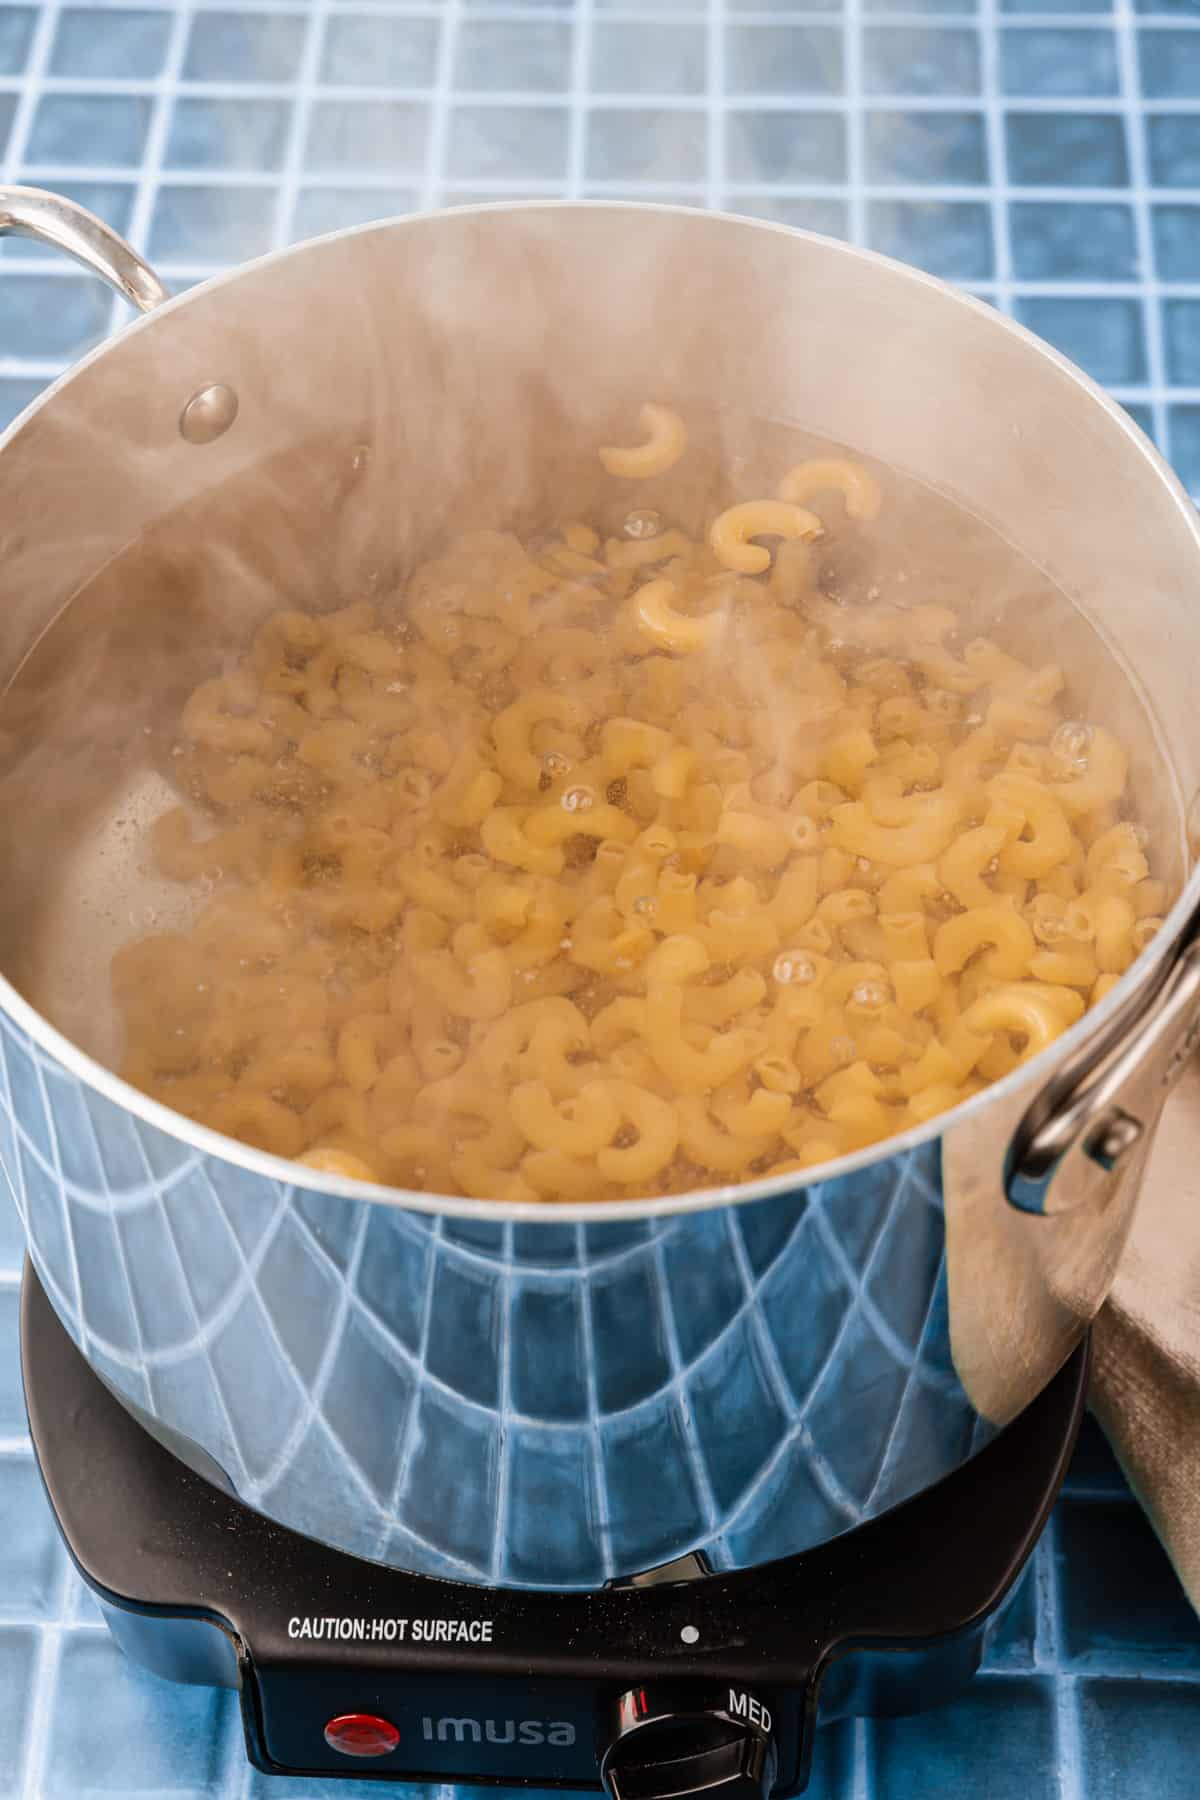 A stainless steel pot of water cooking gluten free macaroni noodles on a hot plate.